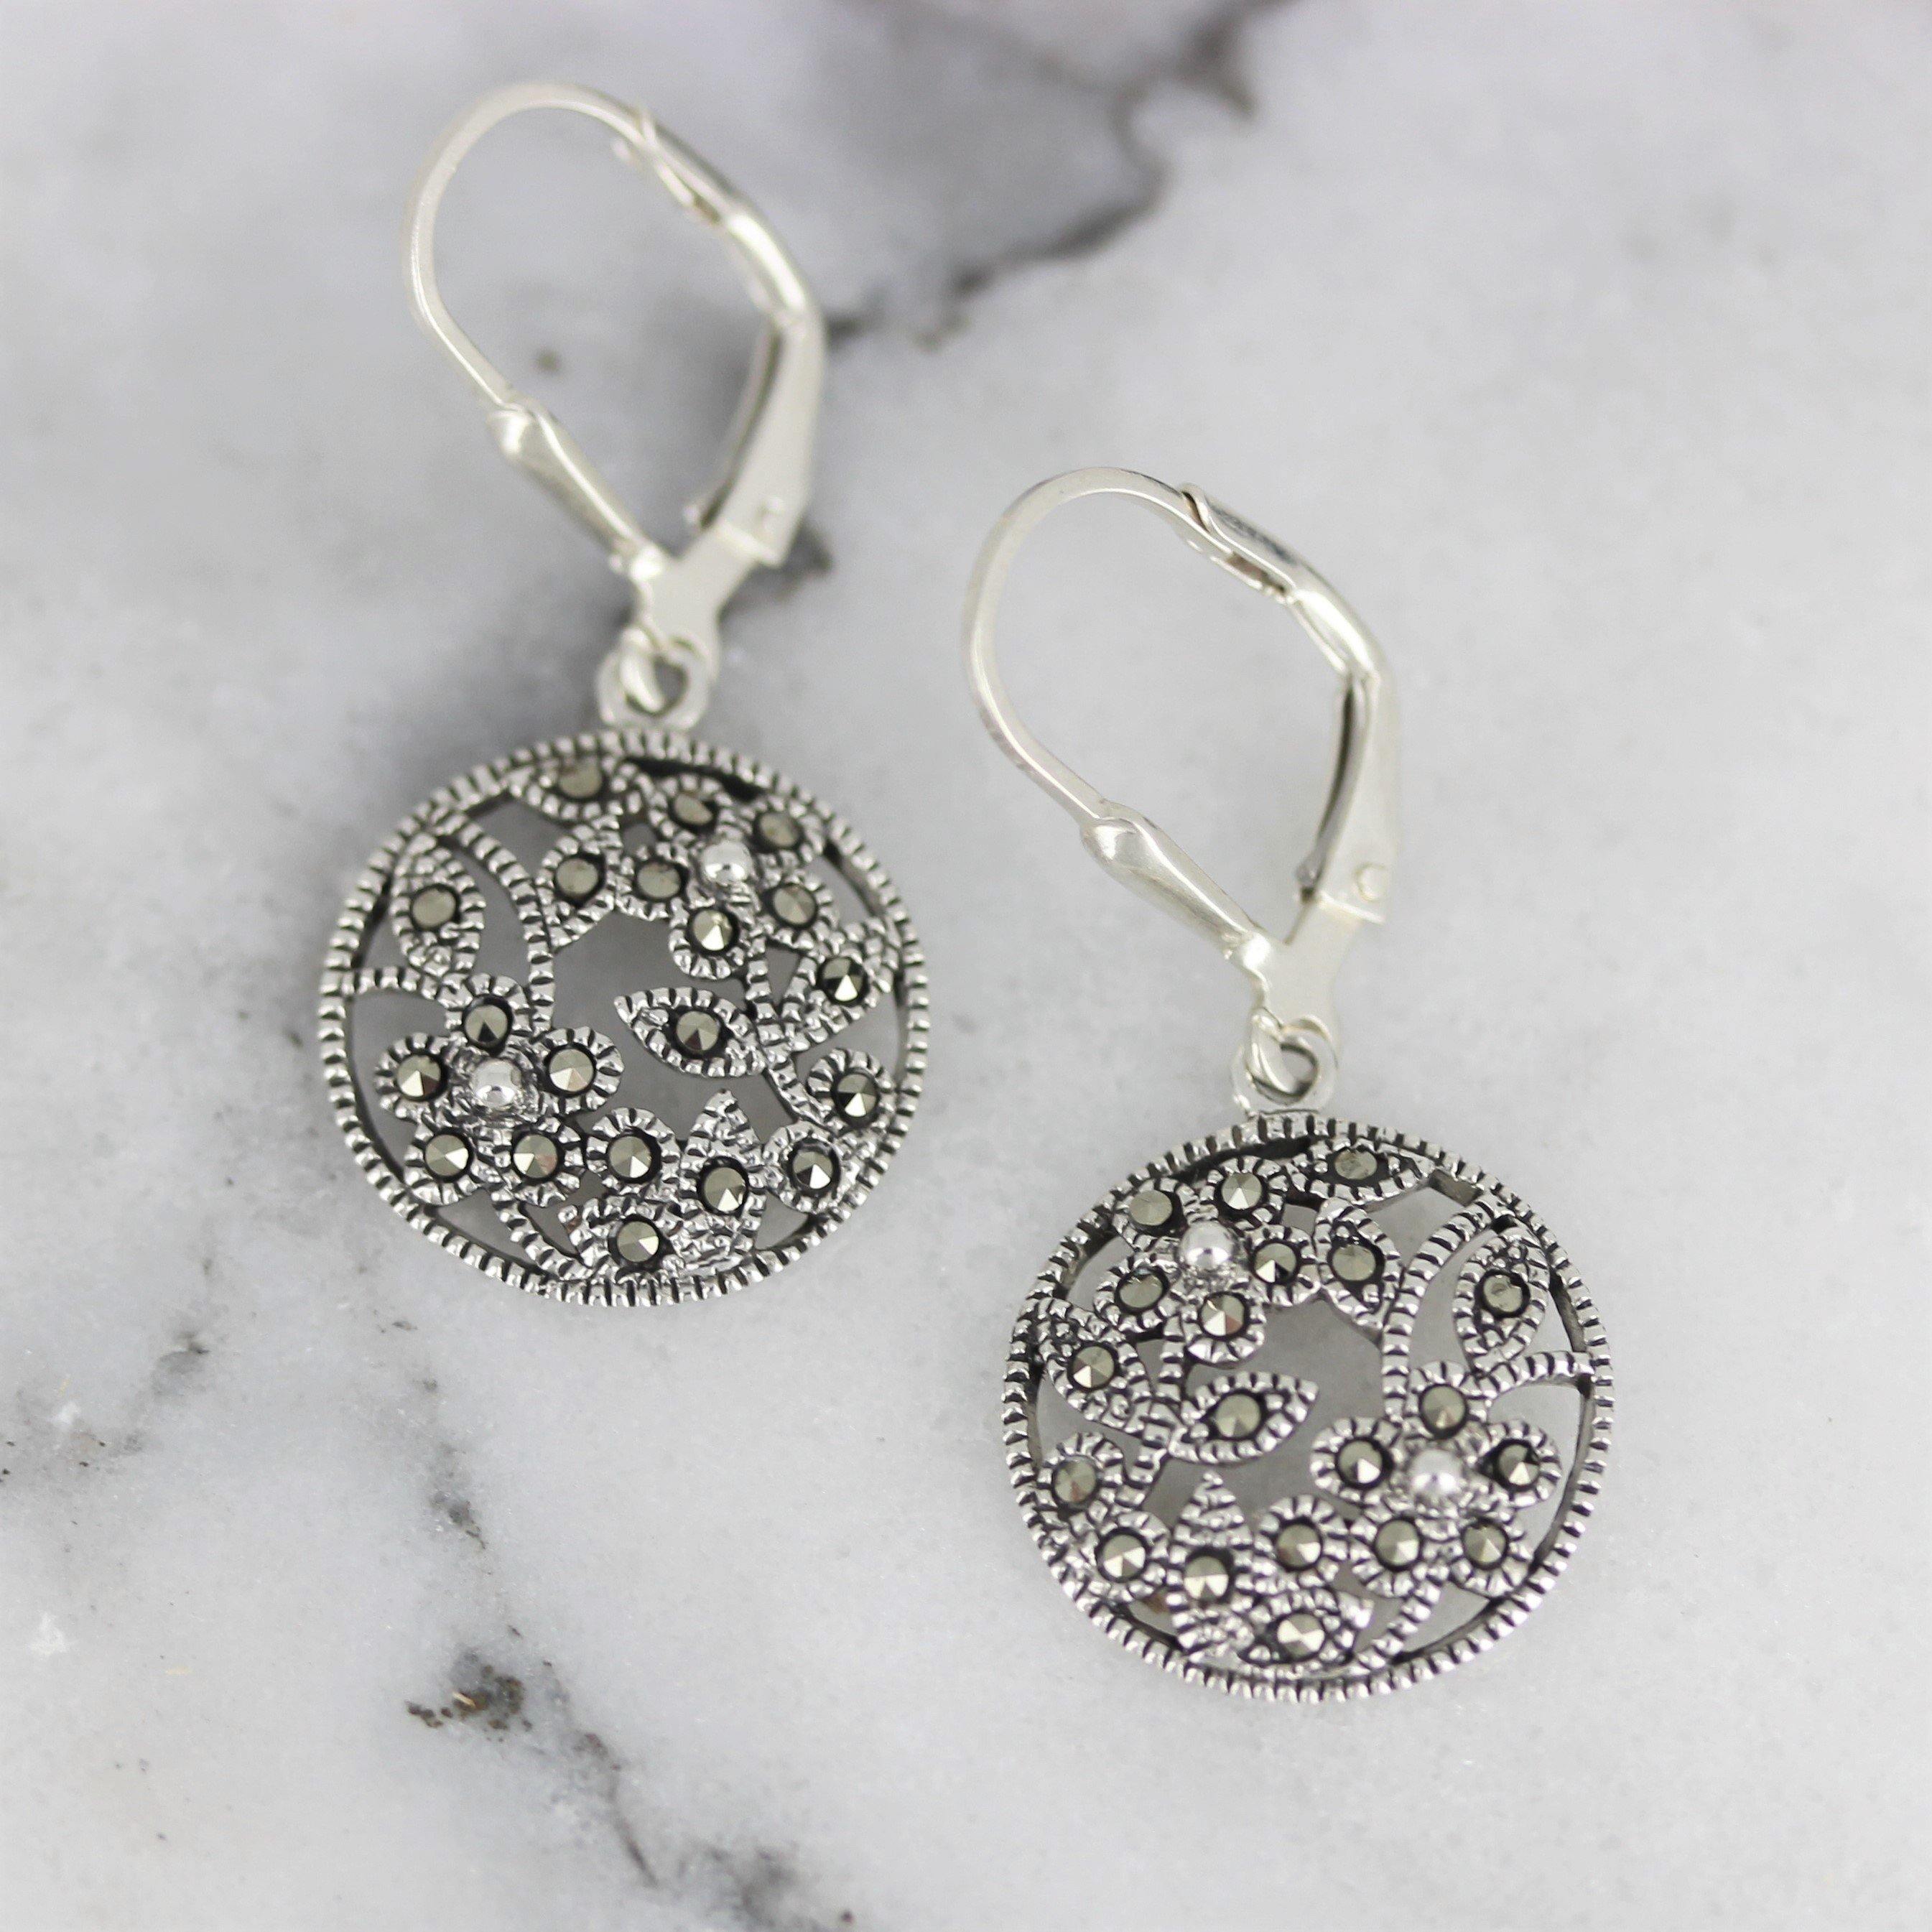 Sterling Silver Marcasite 15mm Round Floral Leverback Drop Earrings - STERLING SILVER DESIGNS